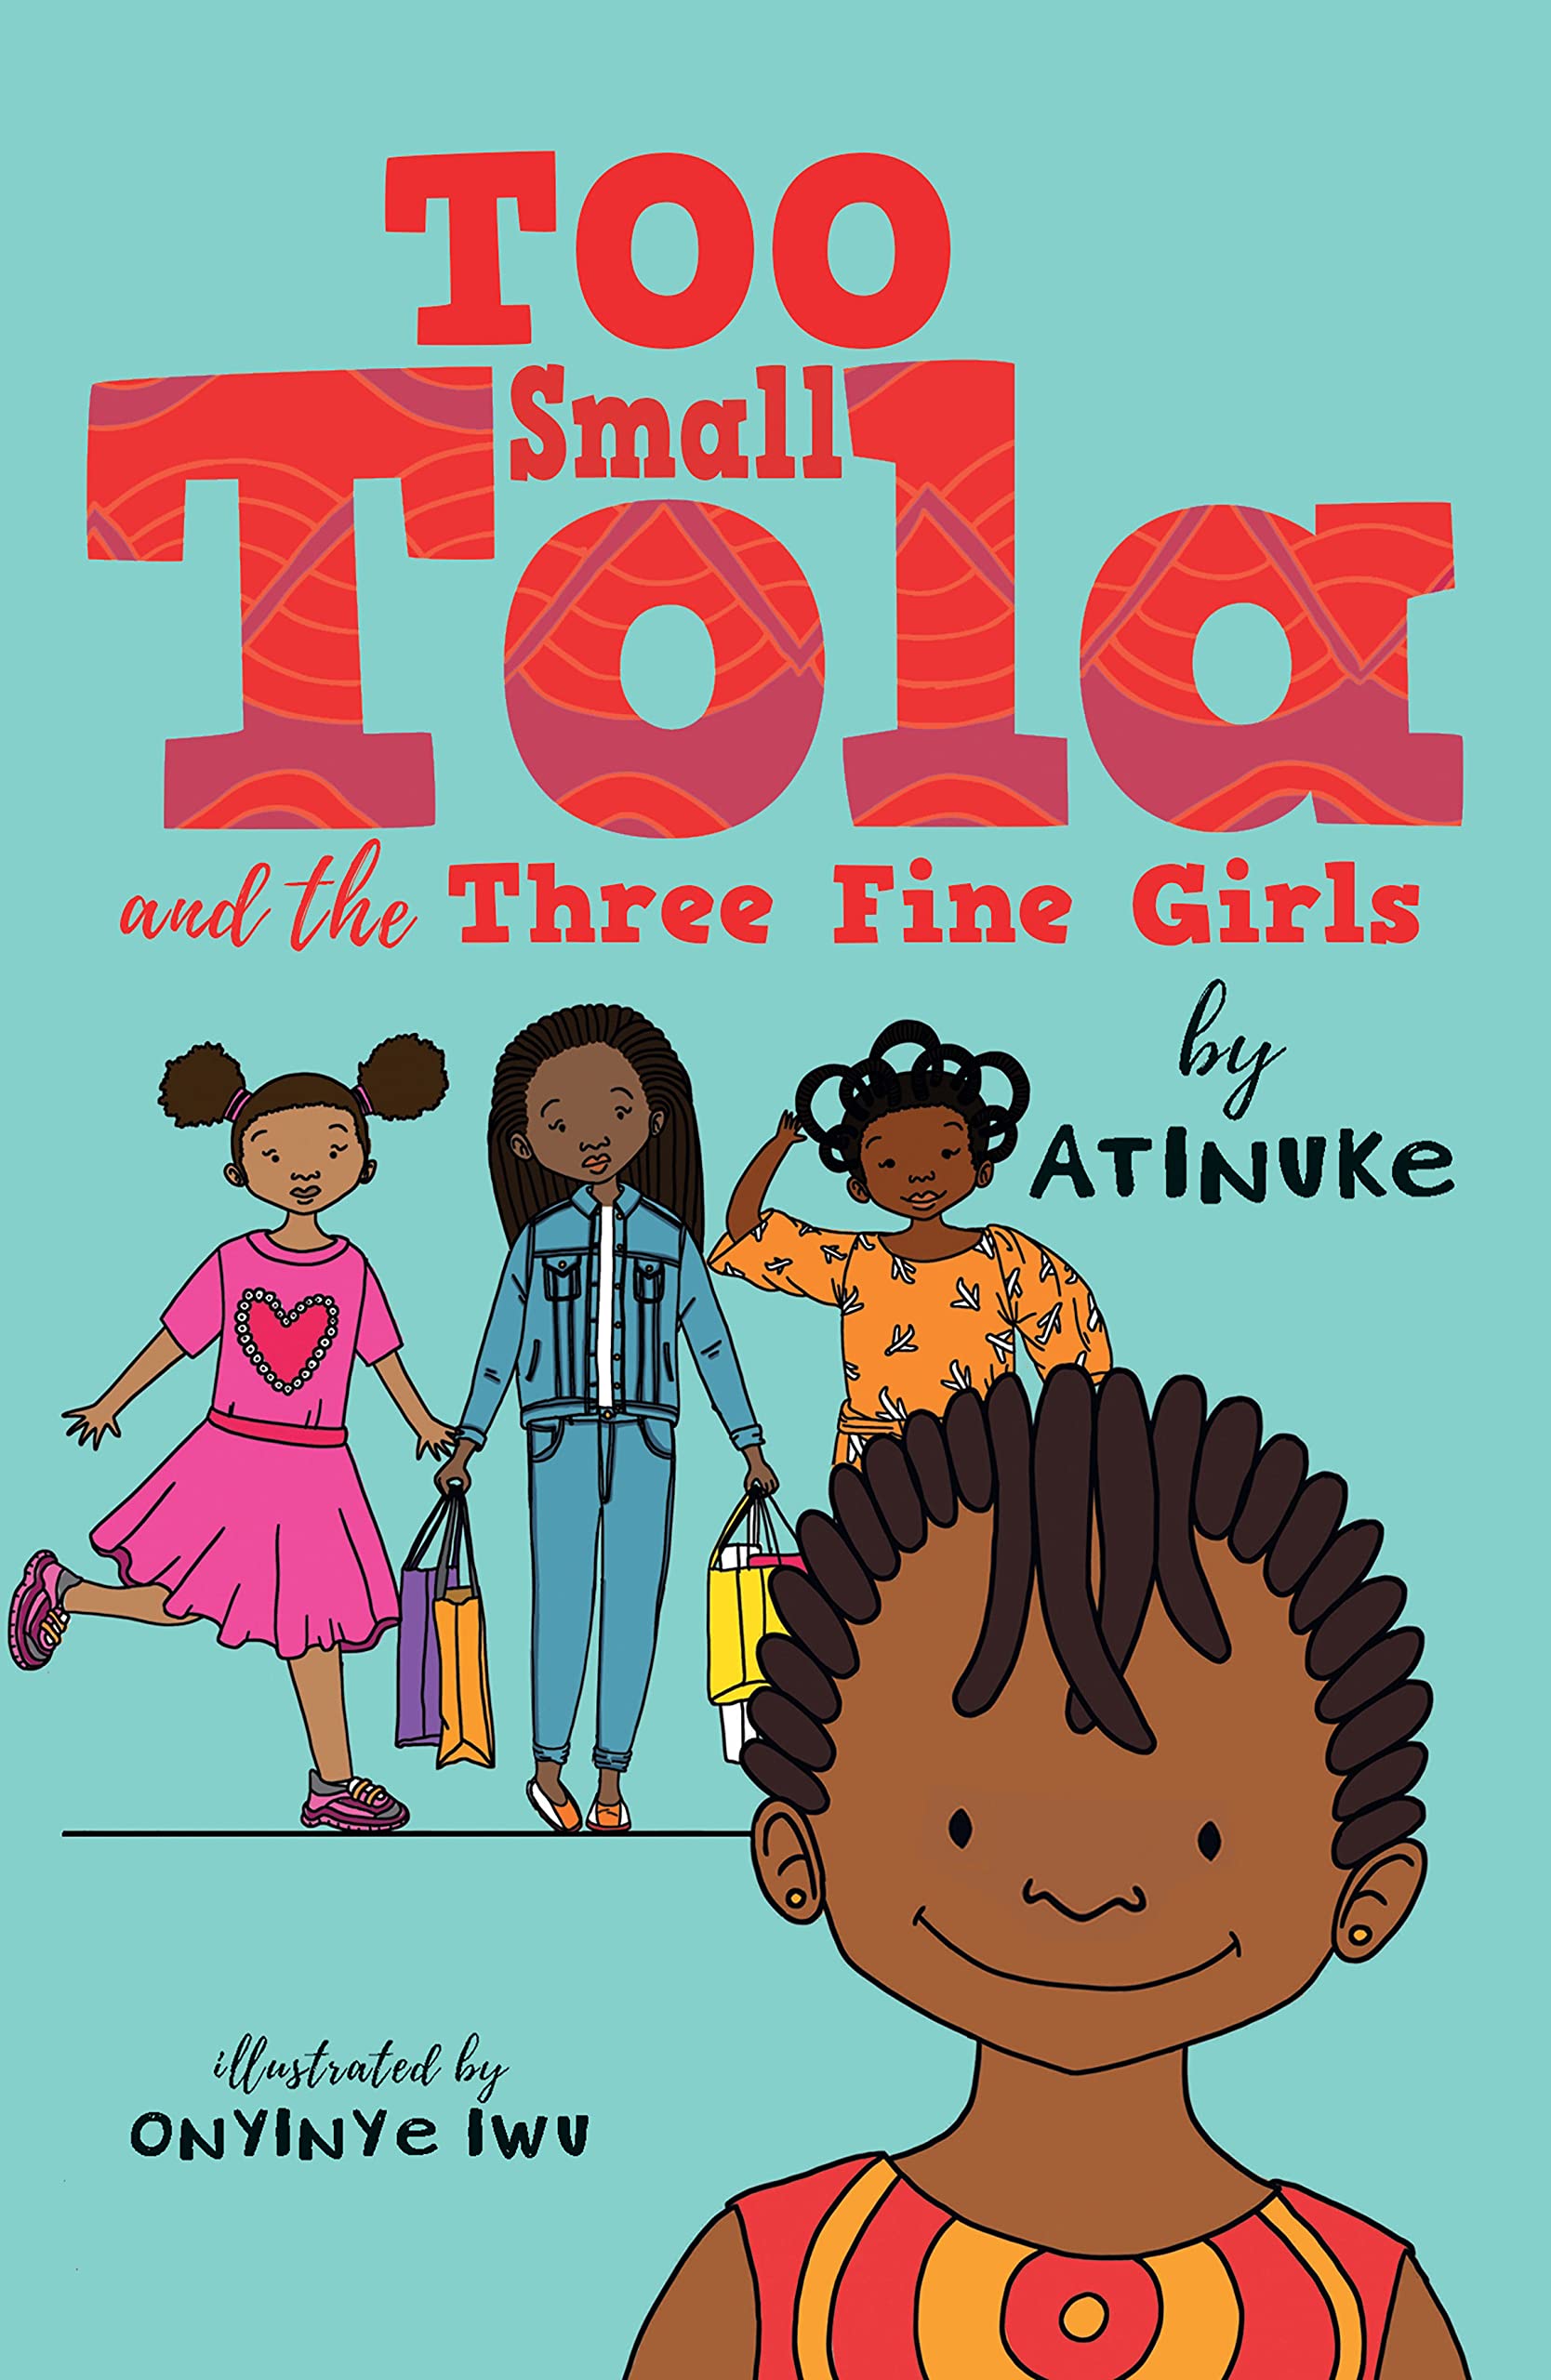 Too Small Tola and the Three Fine Girls (Too Small Tola, #2)